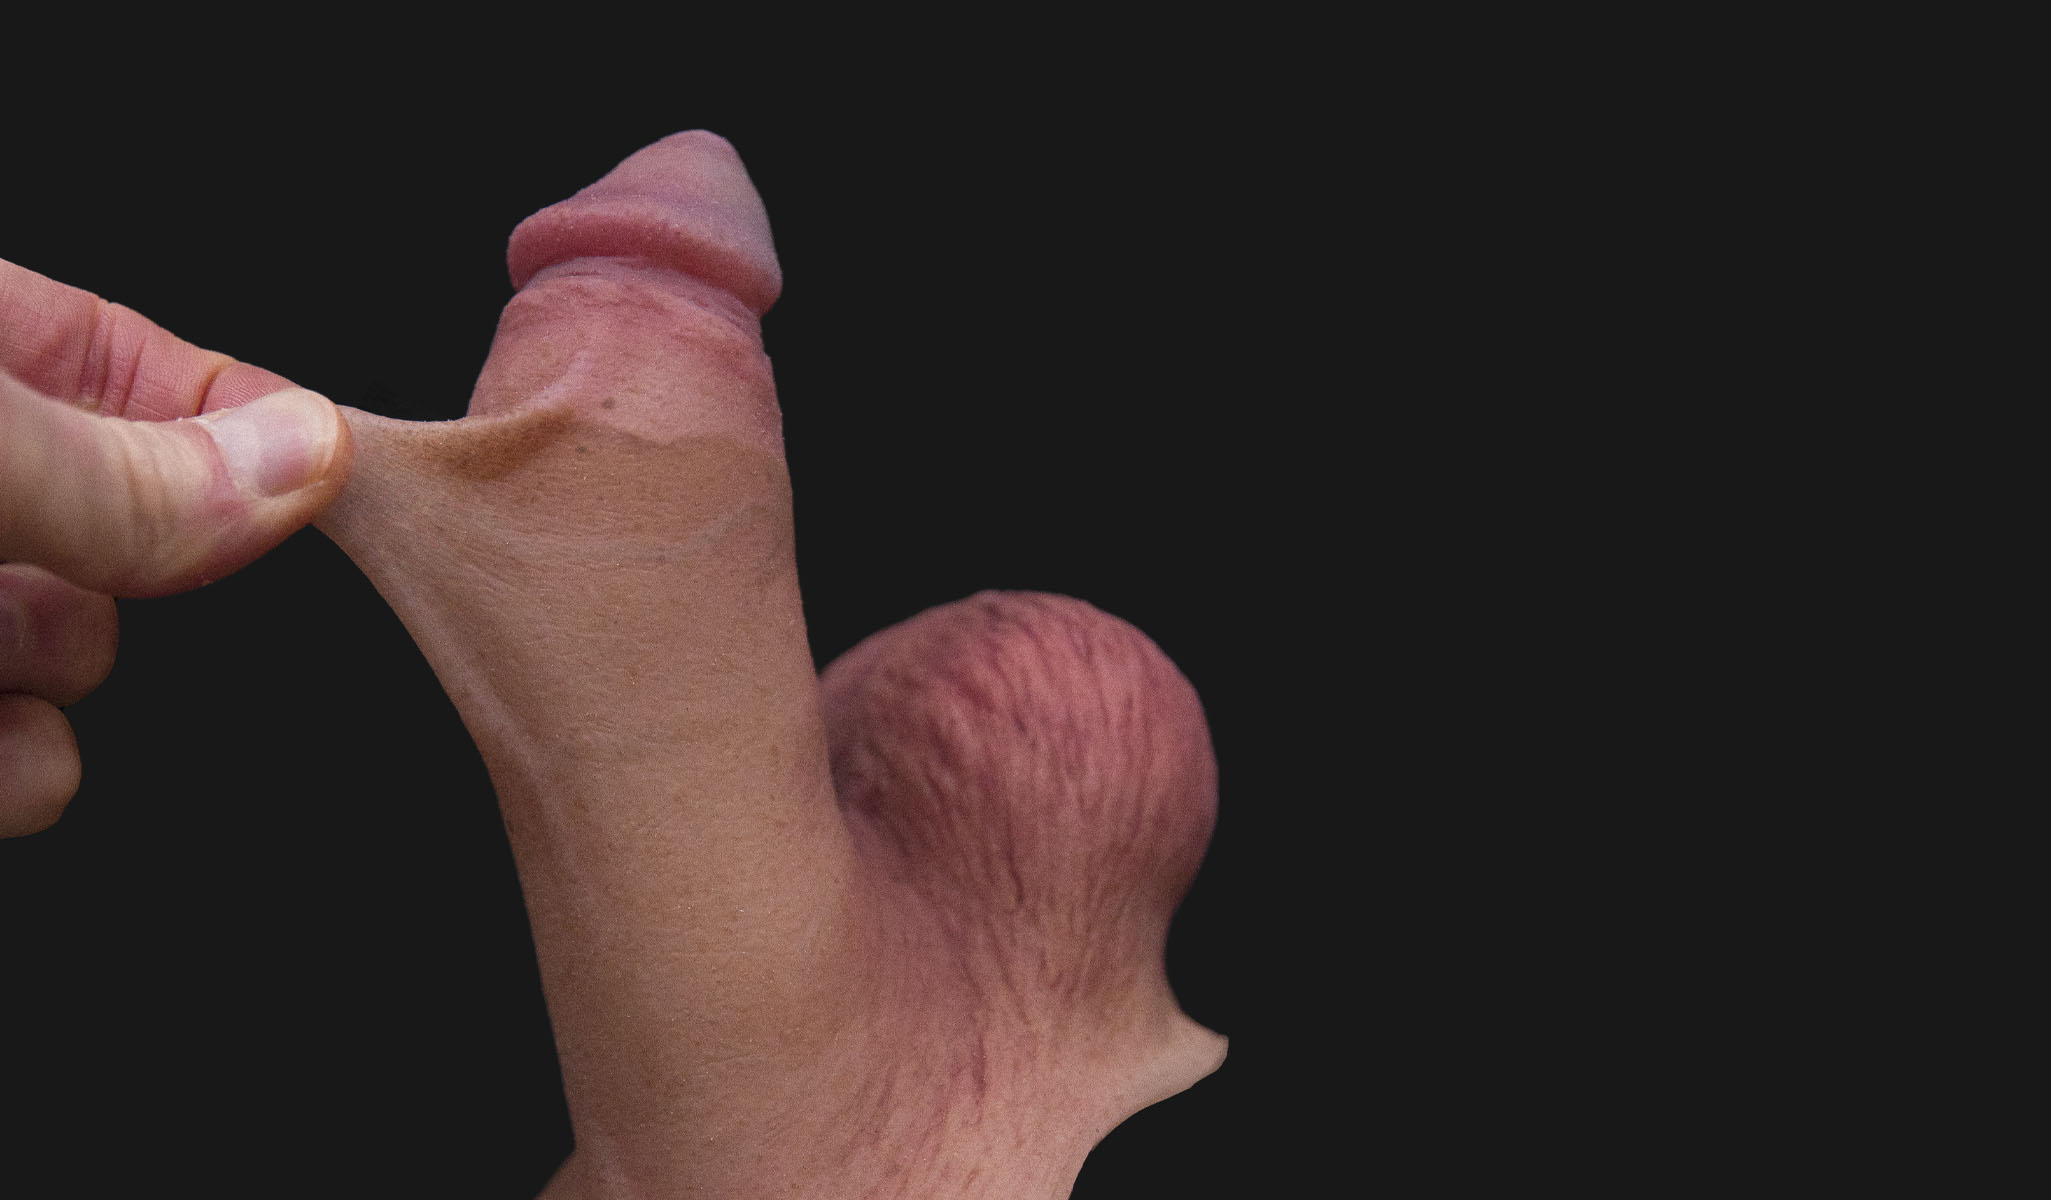 fingers pulling up the skin to demonstrate the moveable skin feature